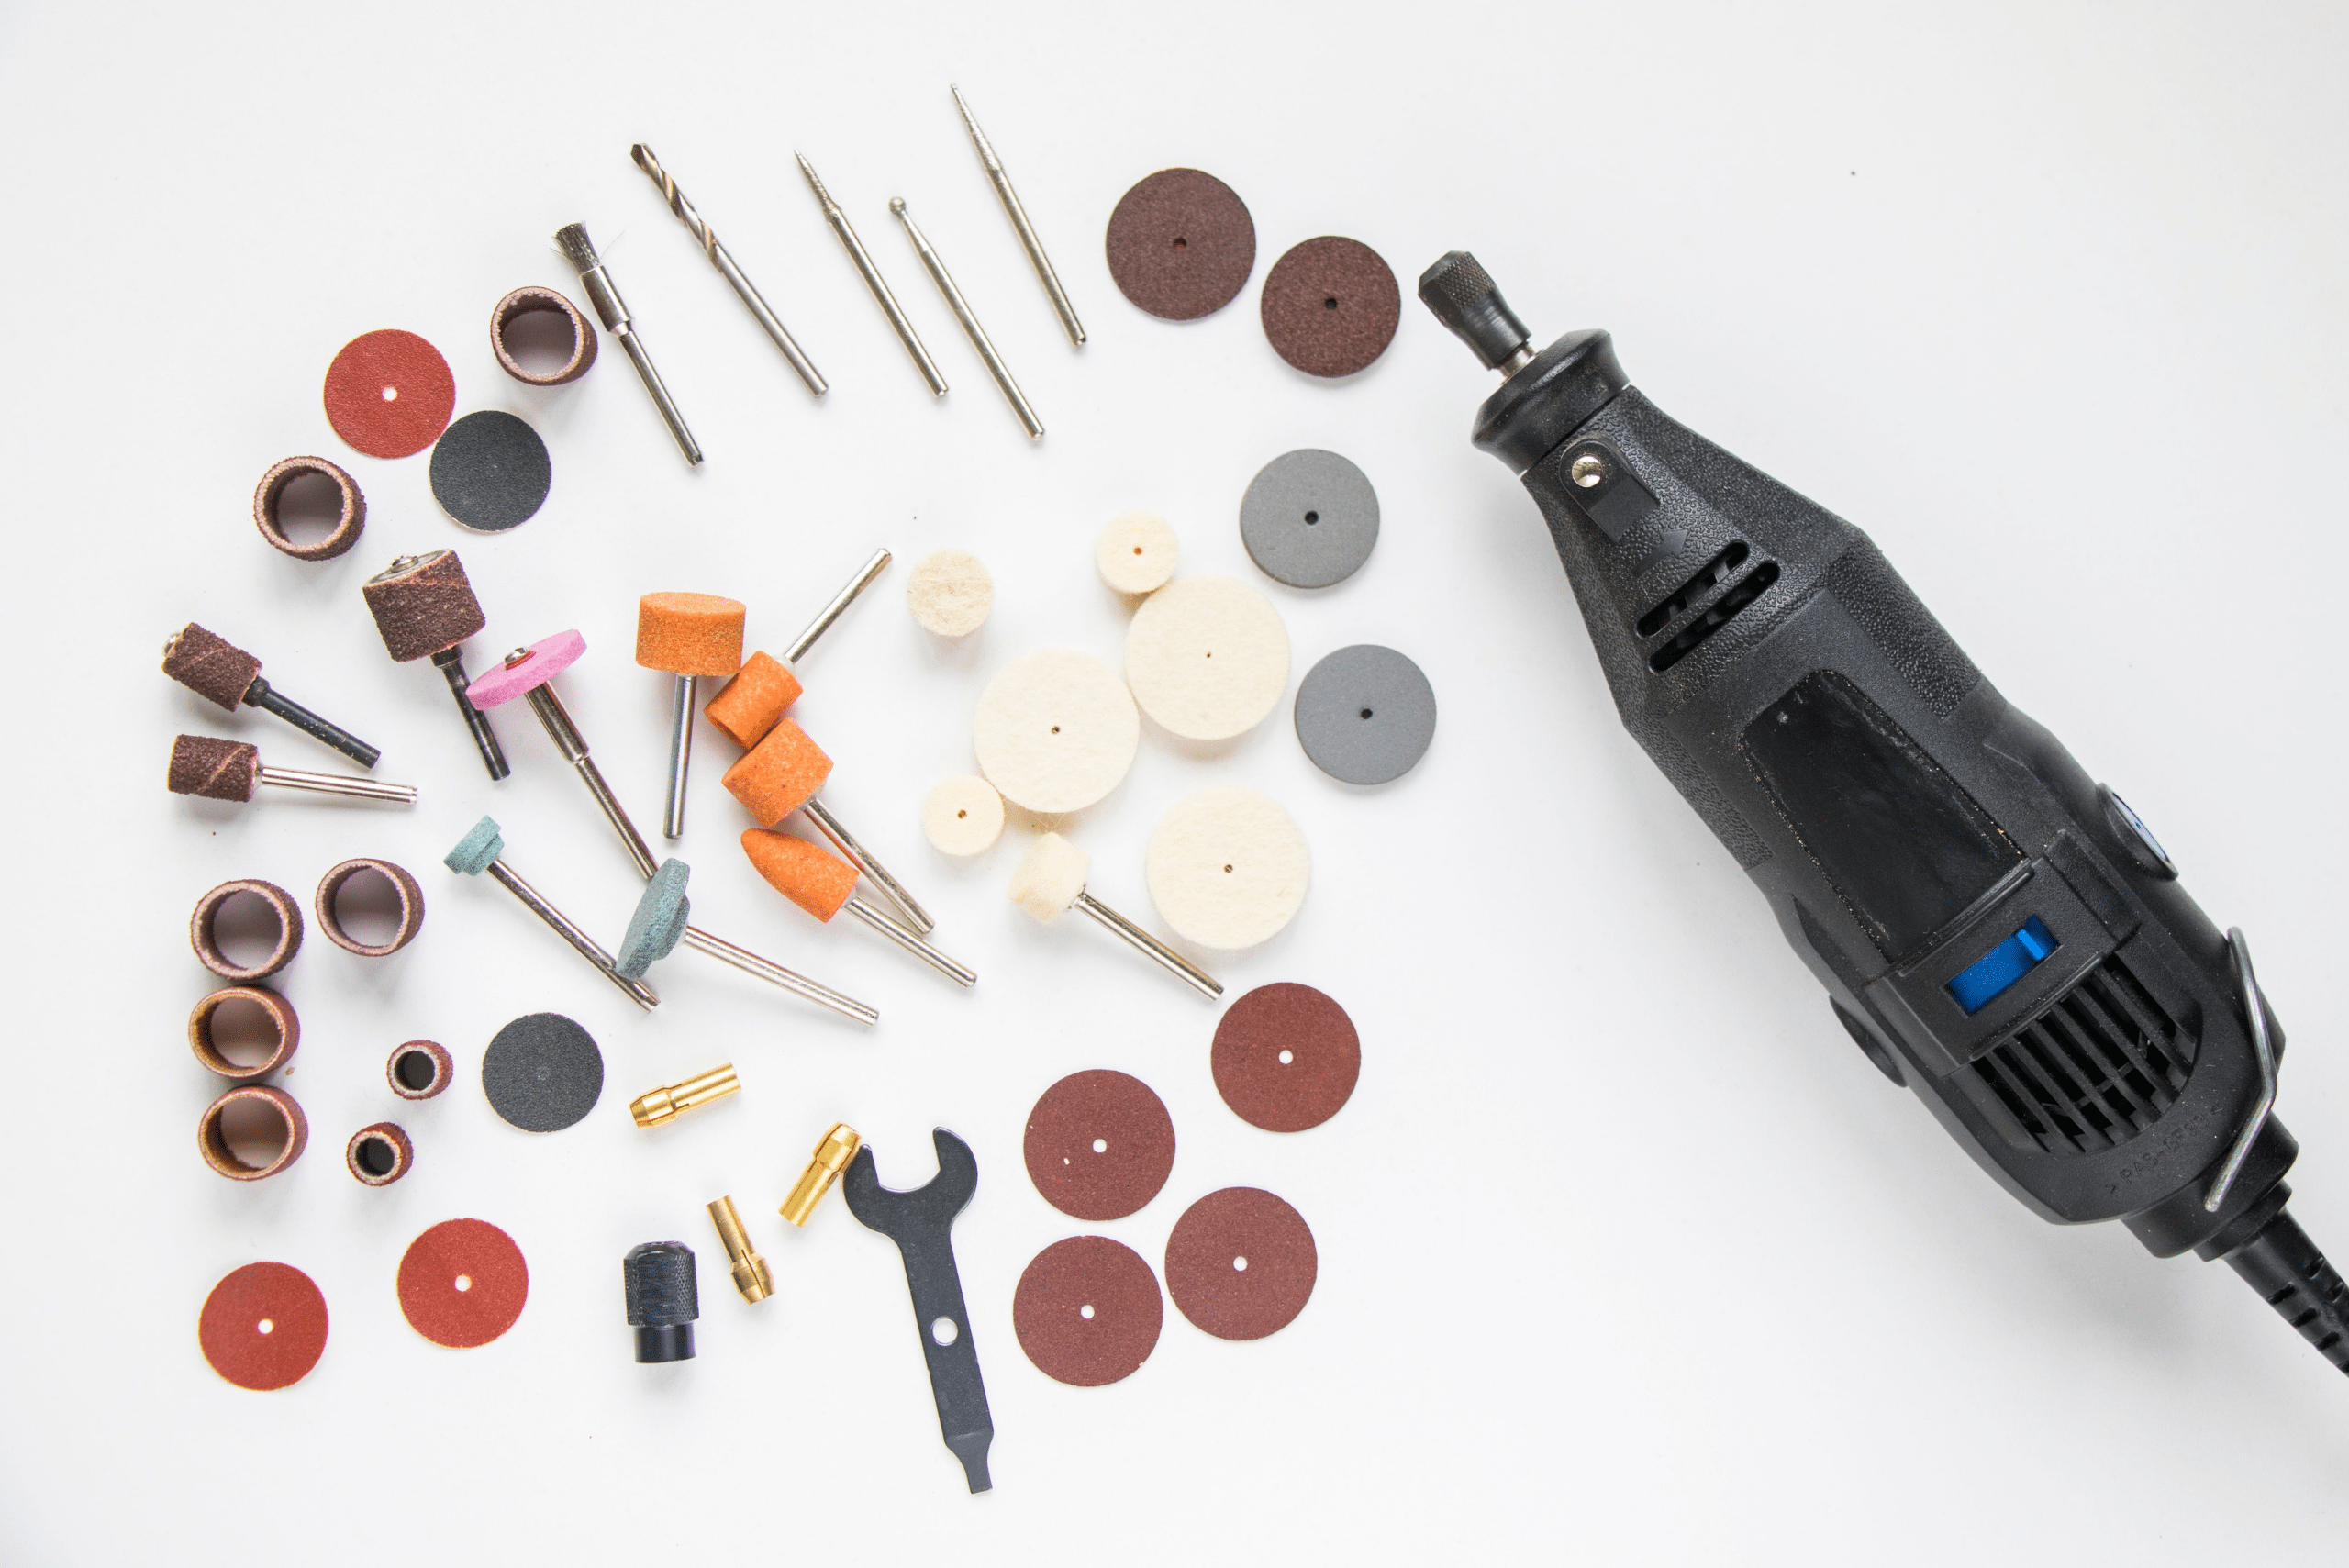 An assortment of attachments and a Dremel tool.